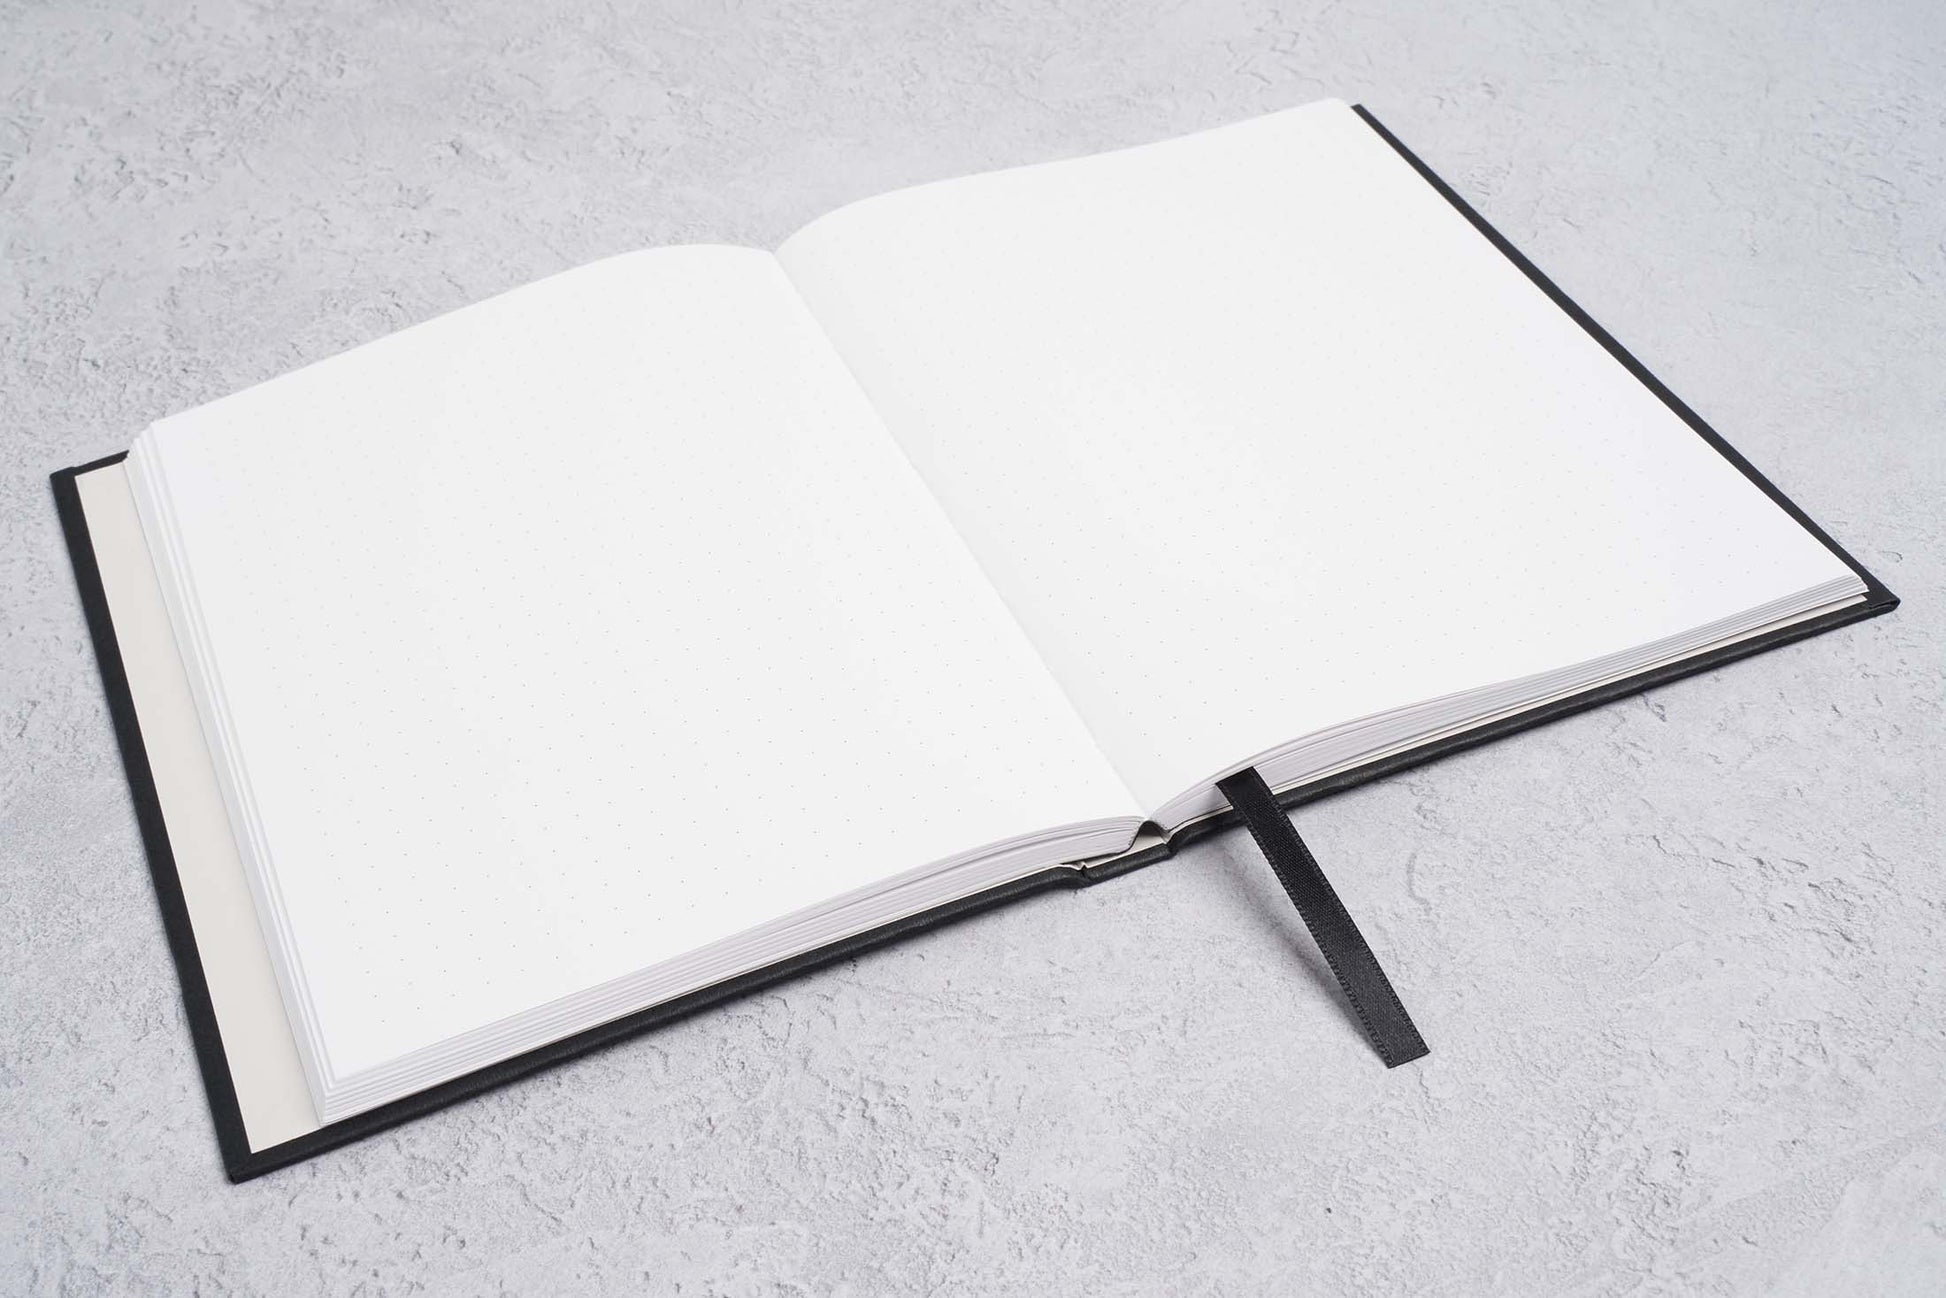 Blocker Paper notebook opened flat against a gray background. Fountain pen friendly dot grid notebook with a hardcover